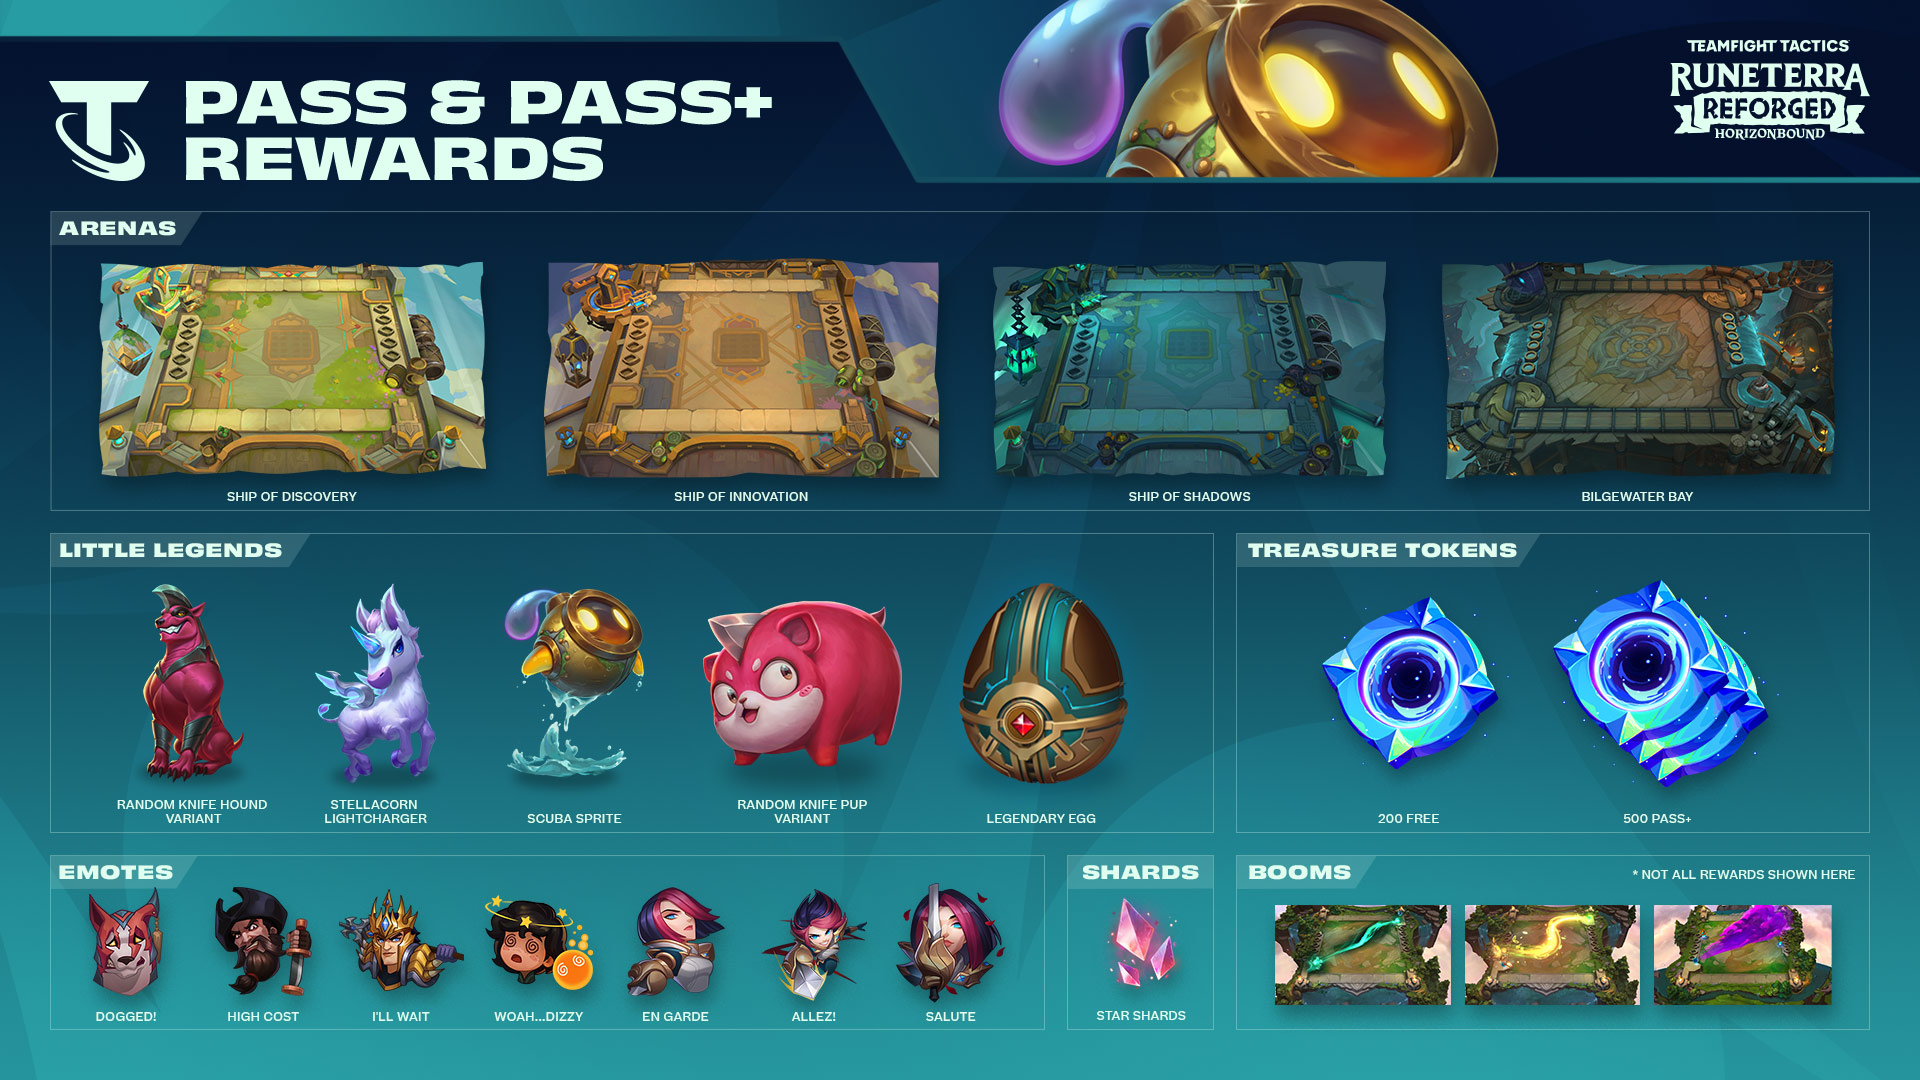 How to use Treasure Tokens in TFT explained